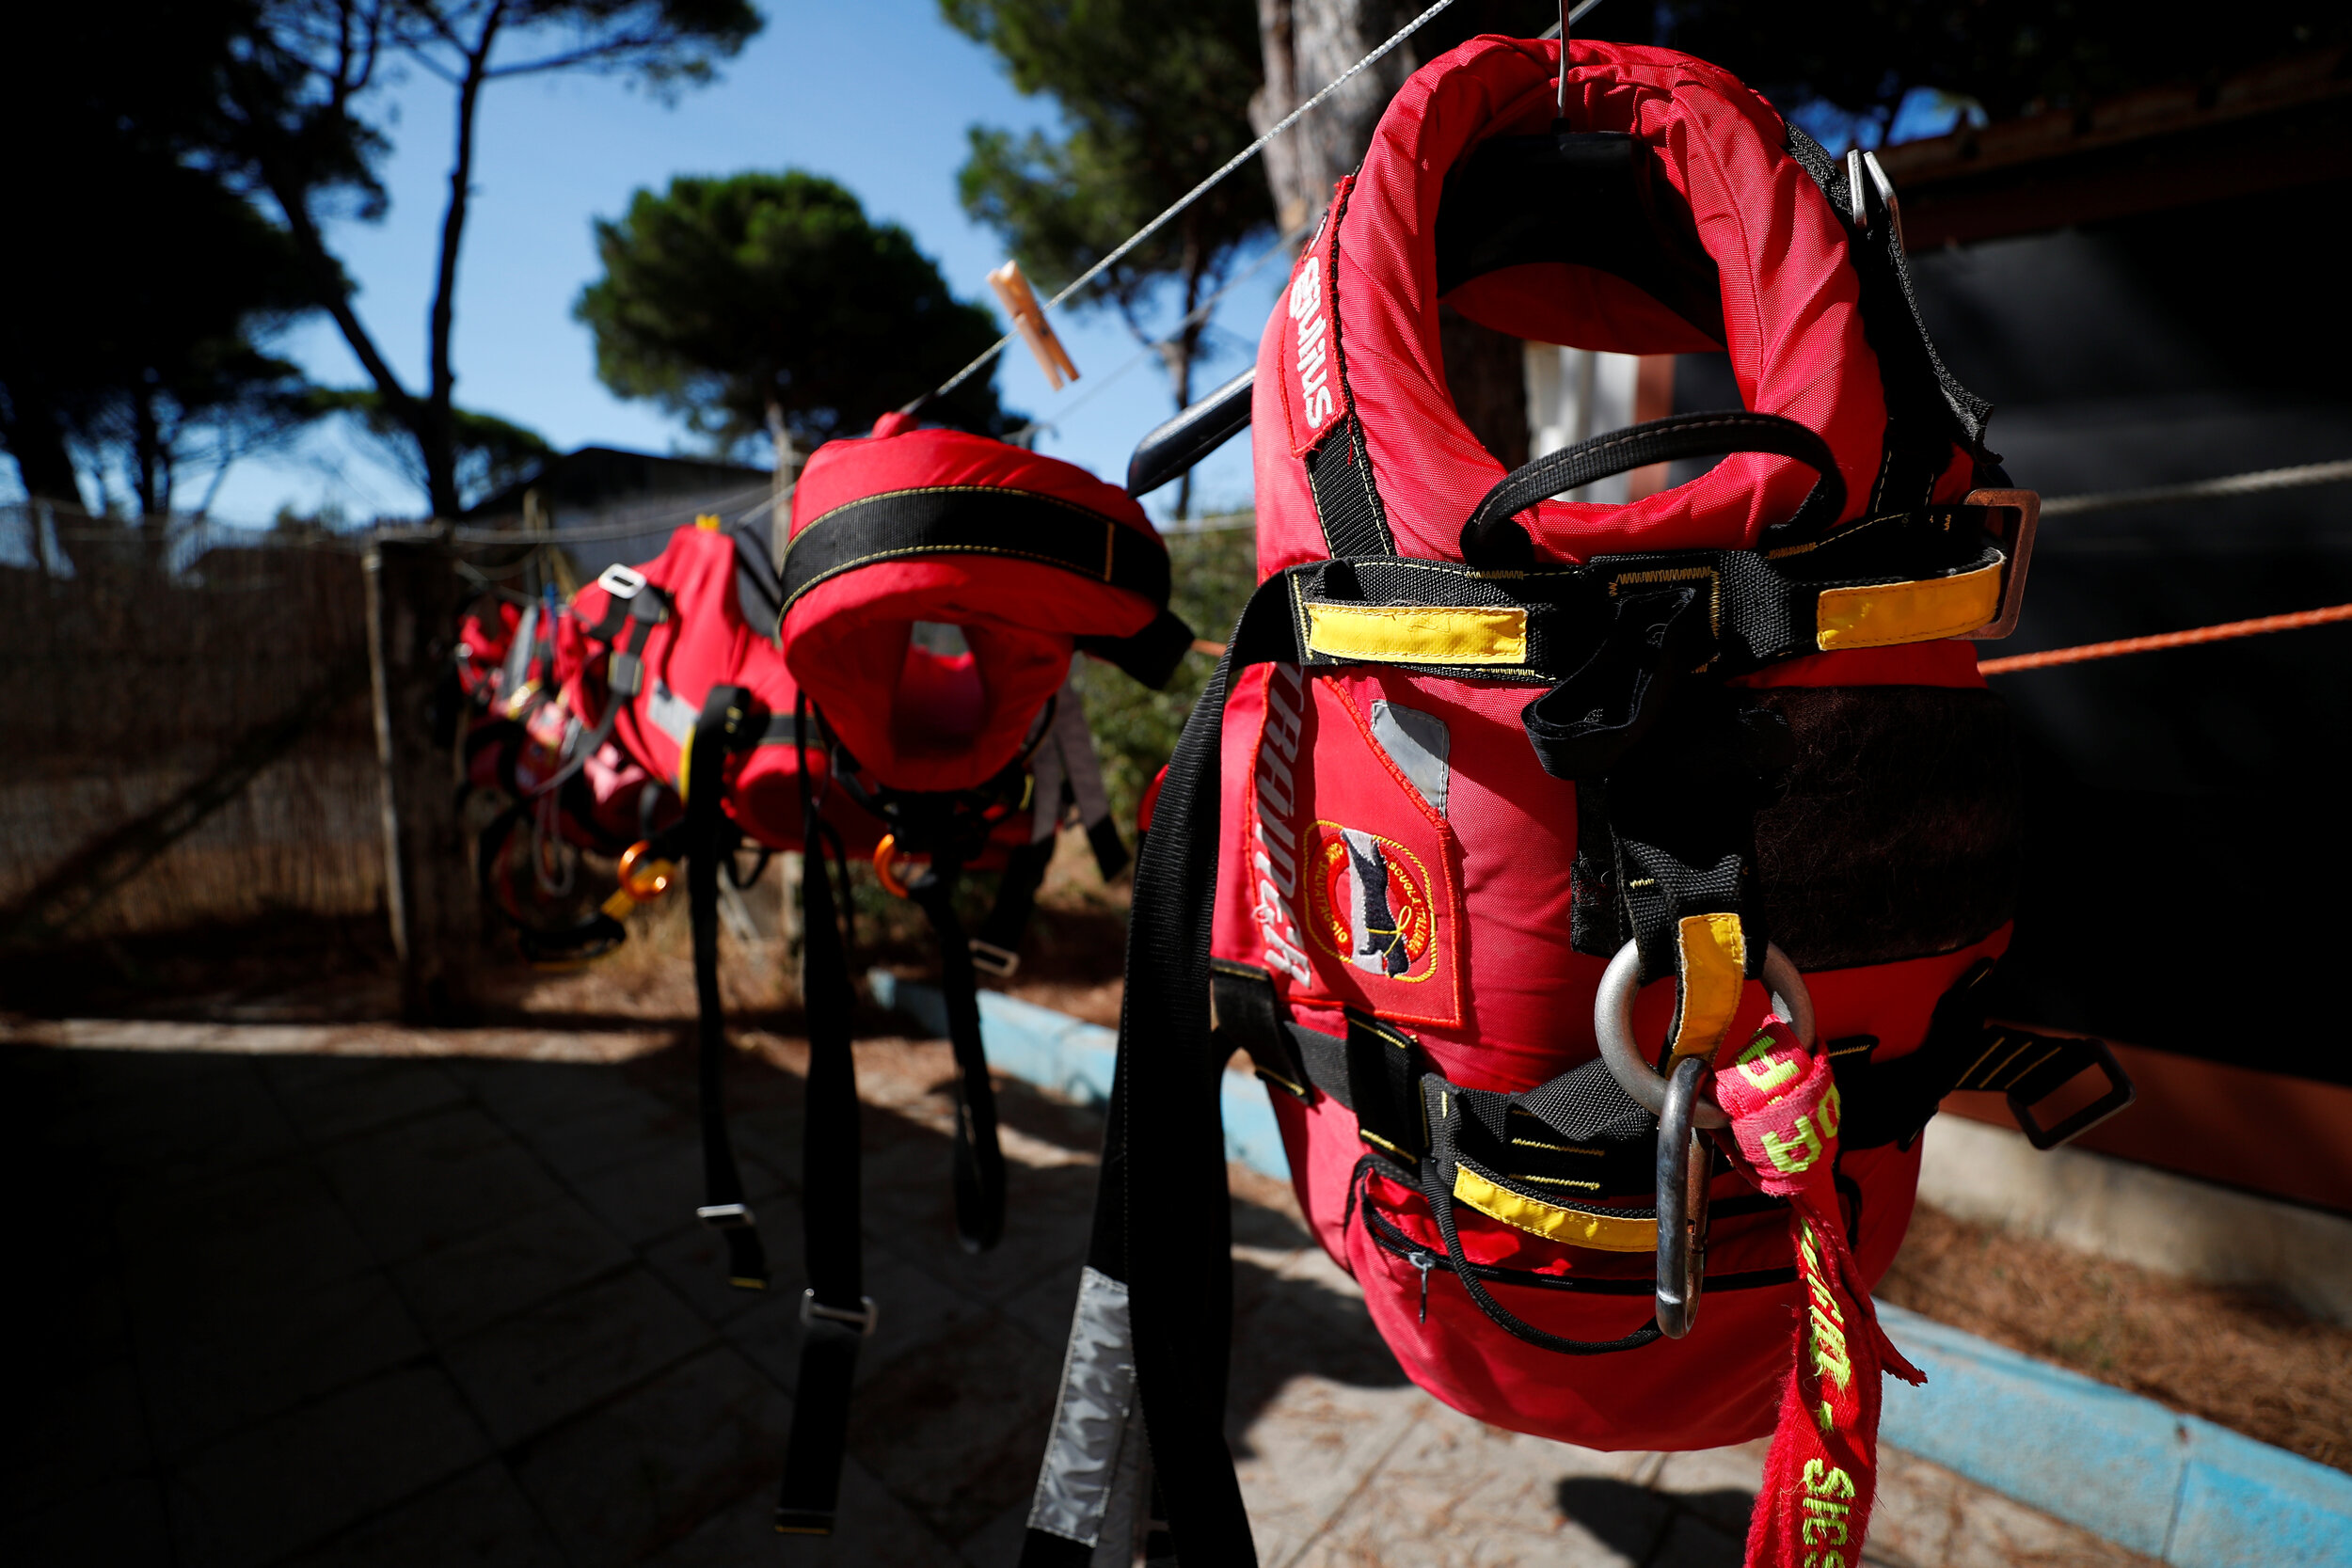  Lifejackets for dogs are seen at the Italian School of Rescue Dogs (La Scuola Italiana Cani Salvataggio) headquarters before an all-female group of canine rescuers start patrolling the beach to ensure swimmers can enjoy their time at the sea in safe